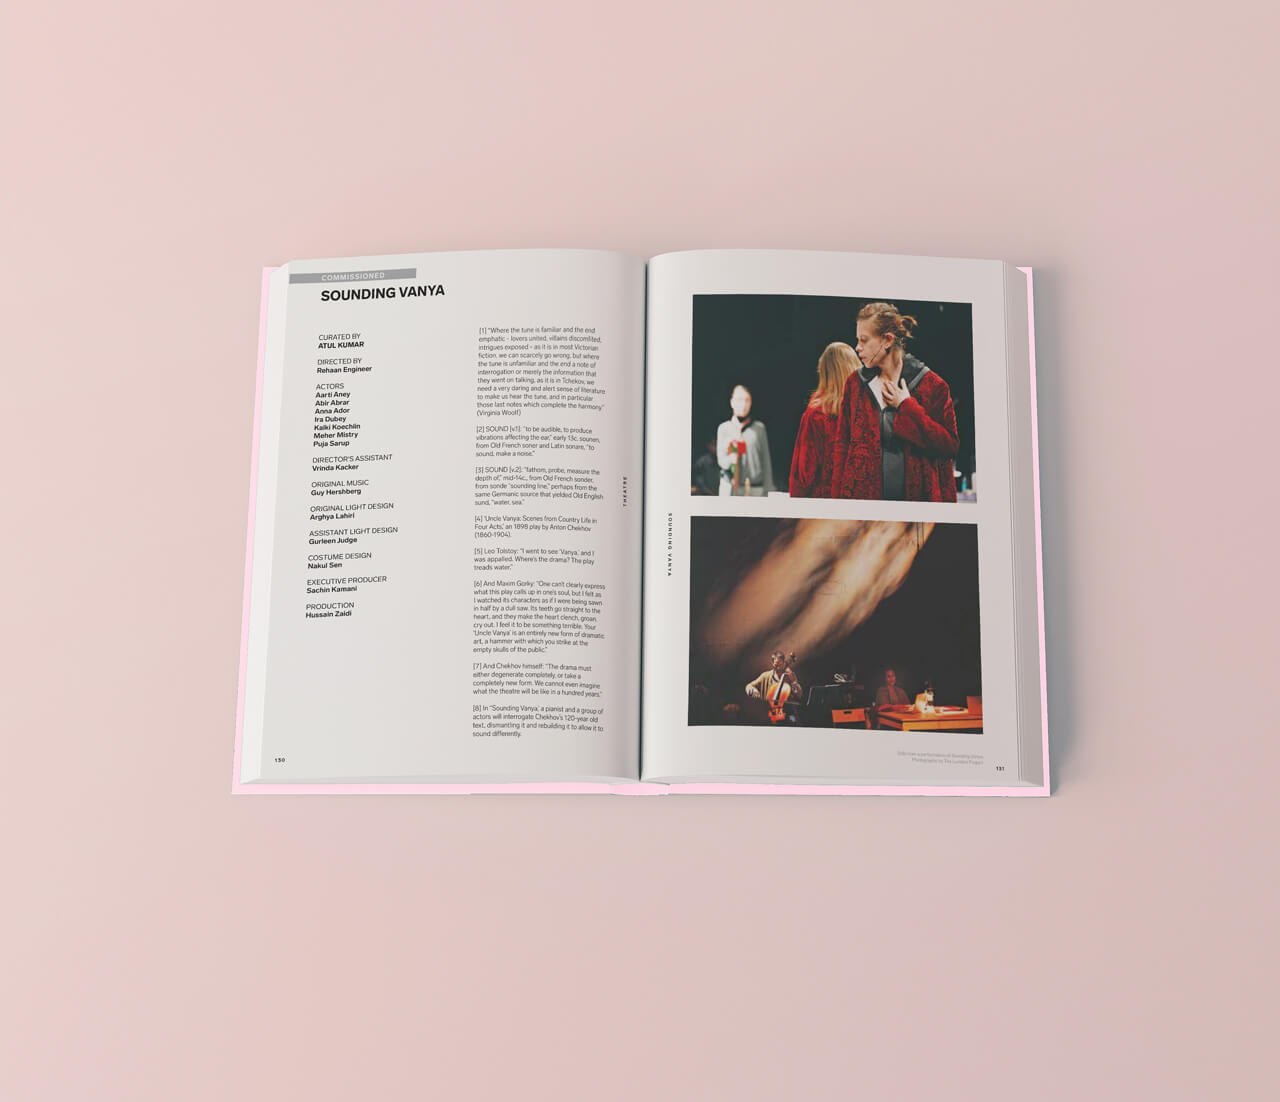 Photo of a spread of the post-festival catalogue for SAF 2019